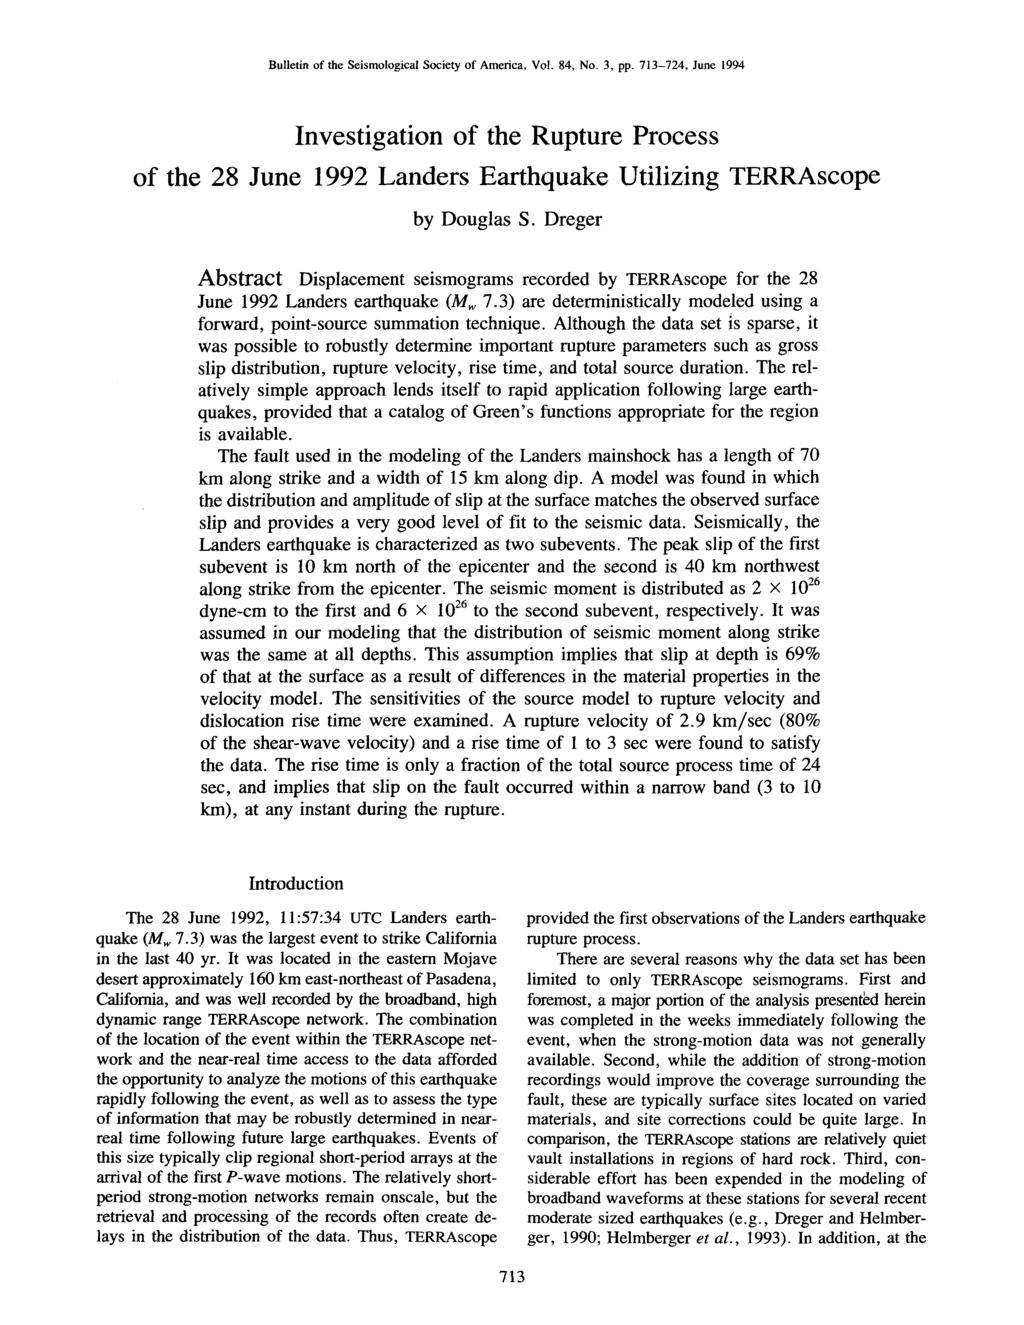 Bulletin of the Seismological Society of America, Vol. 84, No. 3, pp. 713-724, June 1994 nvestigation of the Rupture Process of the 28 June 1992 Landers Earthquake Utilizing TERRAscope by Douglas S.